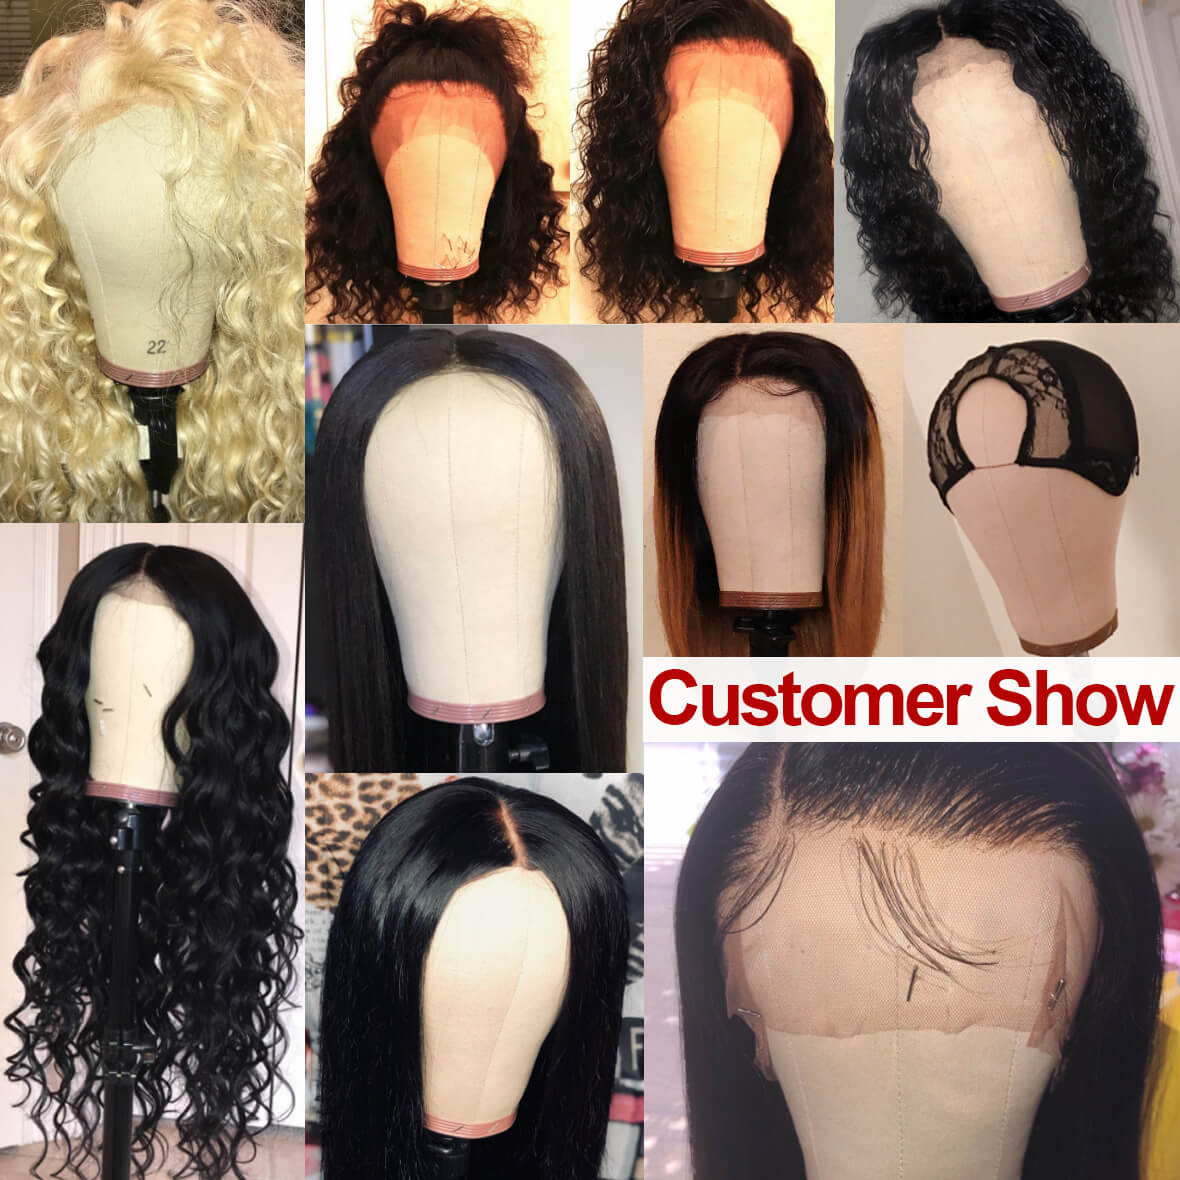 Canvas Wig Head Set for Wigs Toupees Making Display and Styling